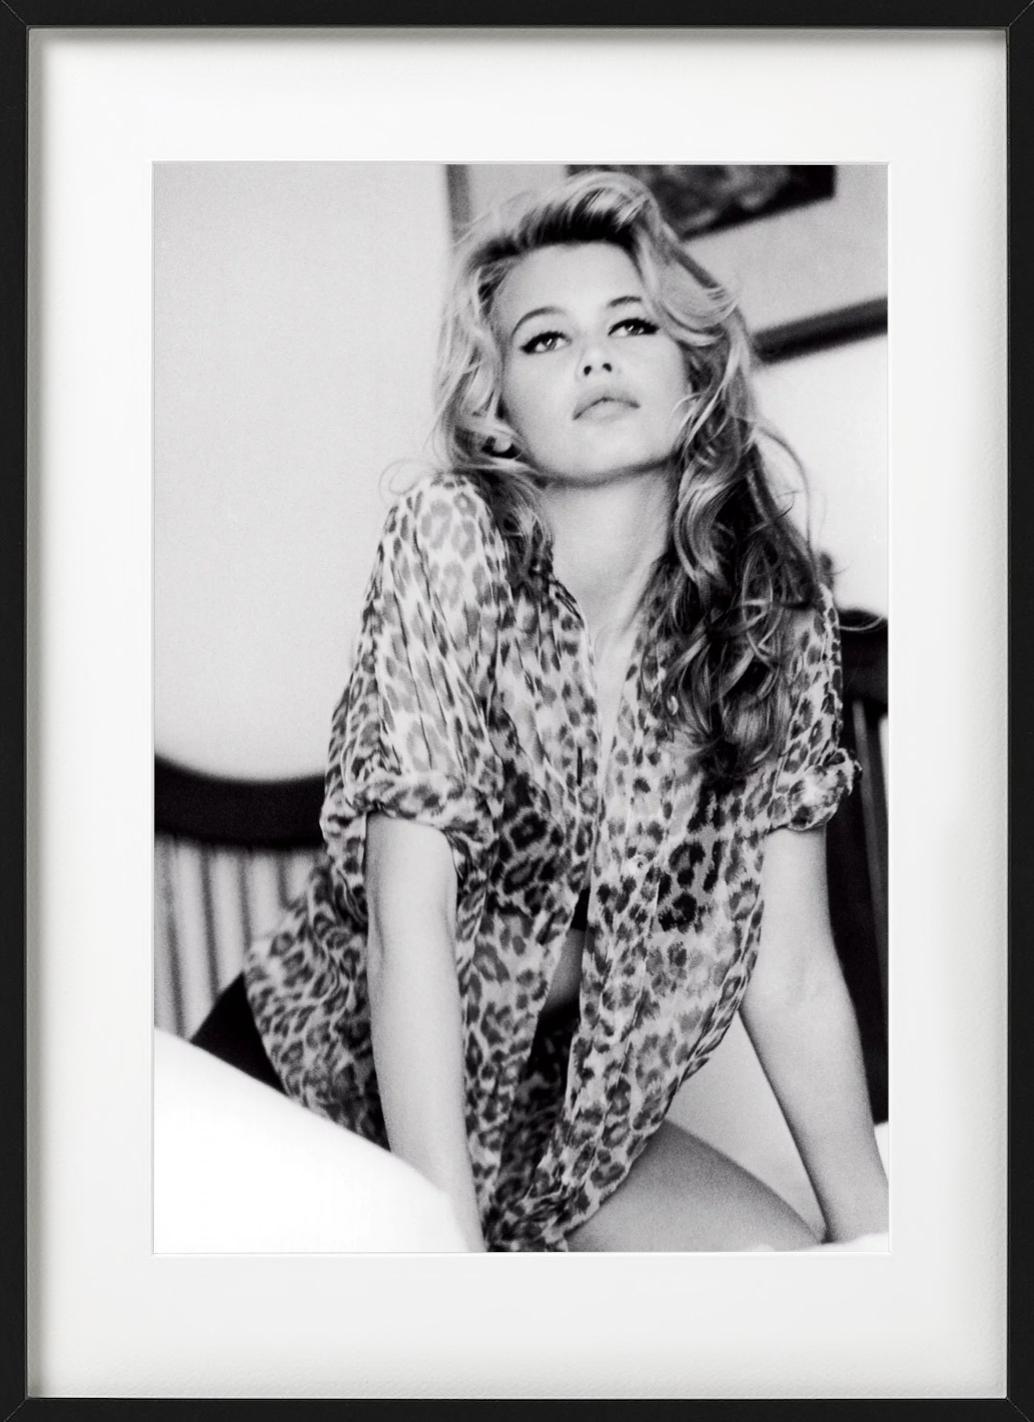 Claudia Schiffer for Guess - Model in Leopard Print, Fine Art Photography, 1989 For Sale 8